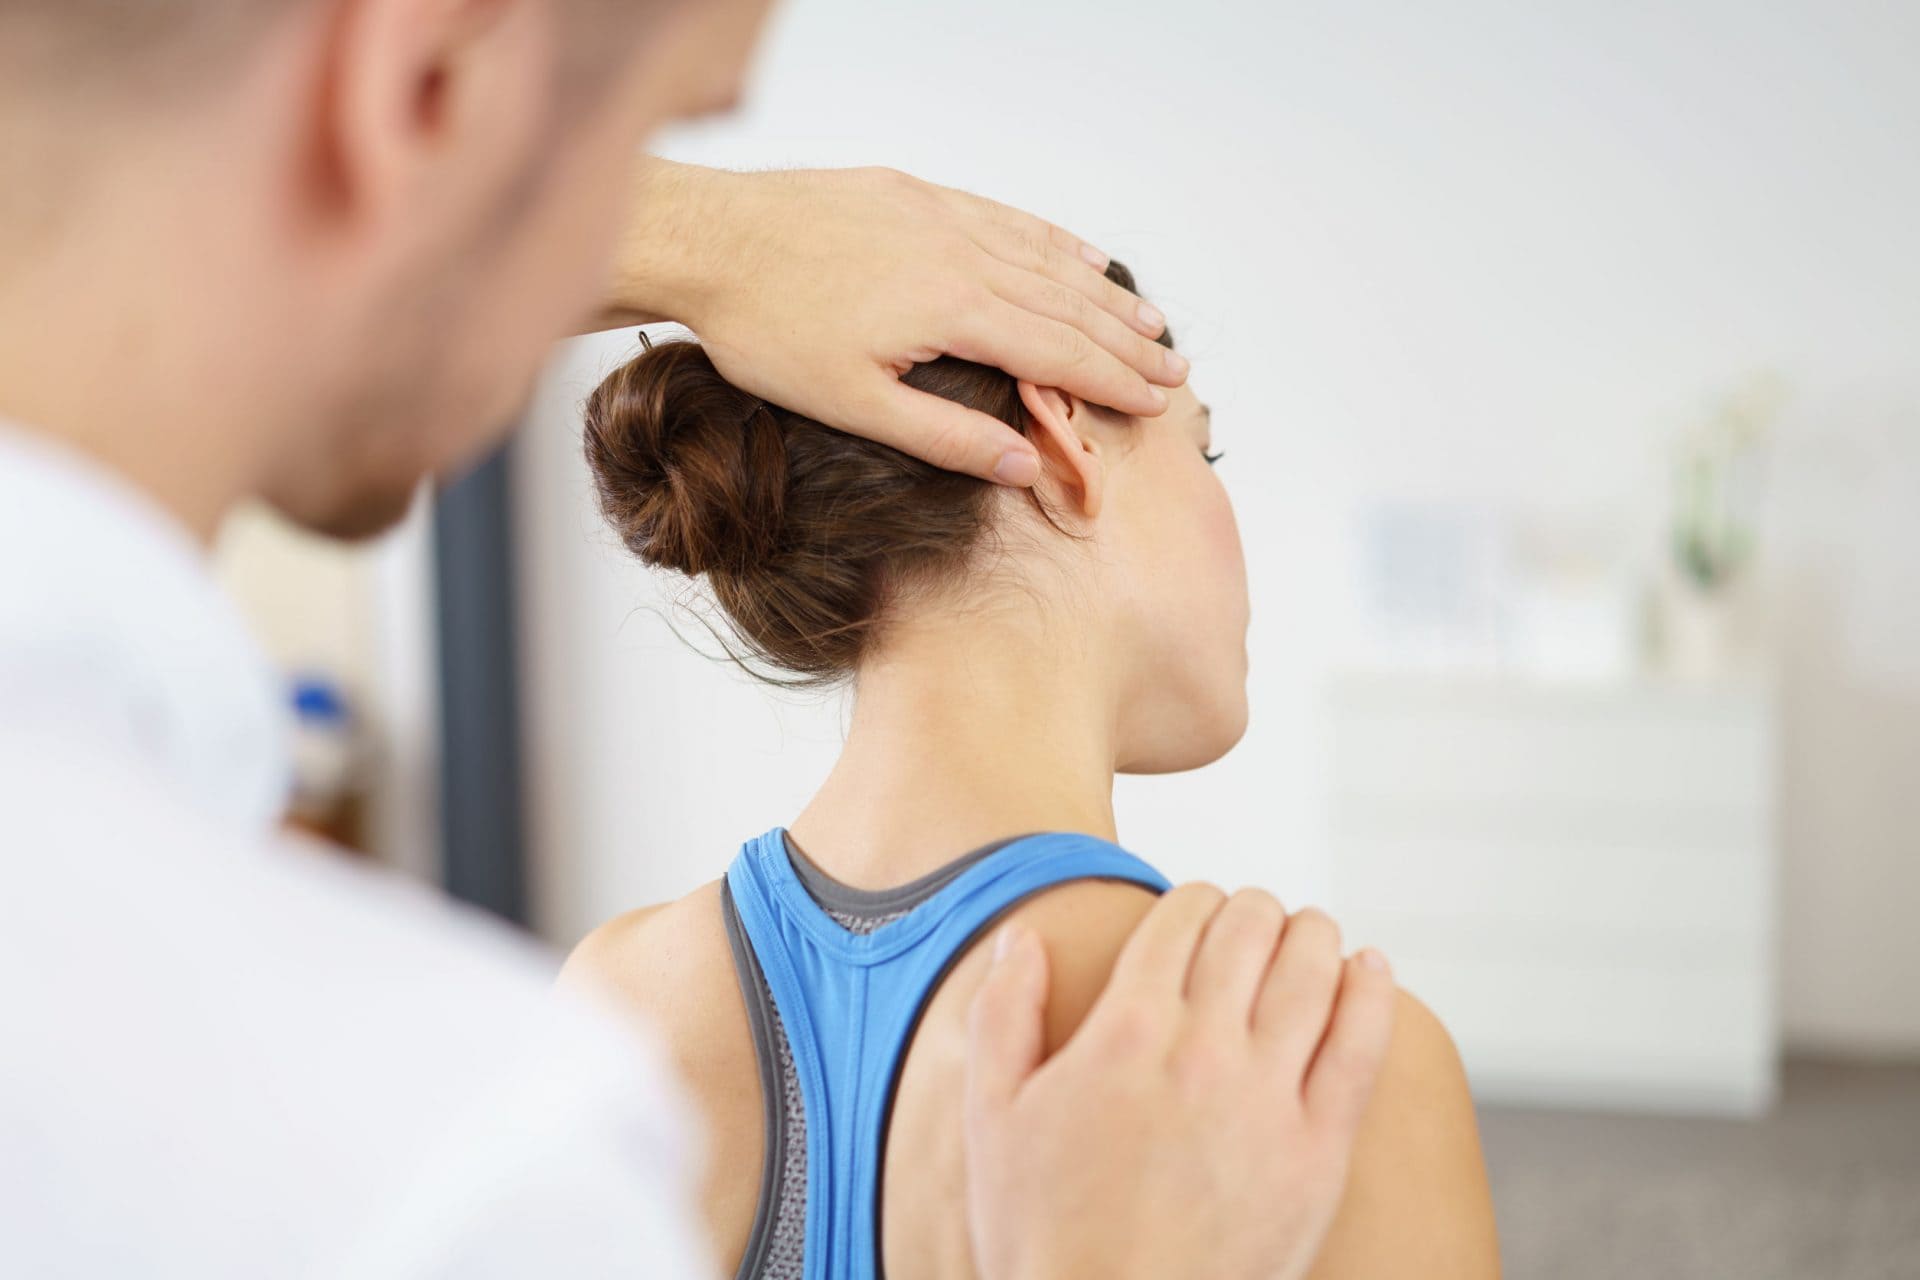 Selective Functional Movement Assessment - Specific Movement Patterns and Exercises Assigned to the Patient to Help the Practitioner Diagnose and Treat Source of Pain | https://physiologicnyc.com/chiropractic/